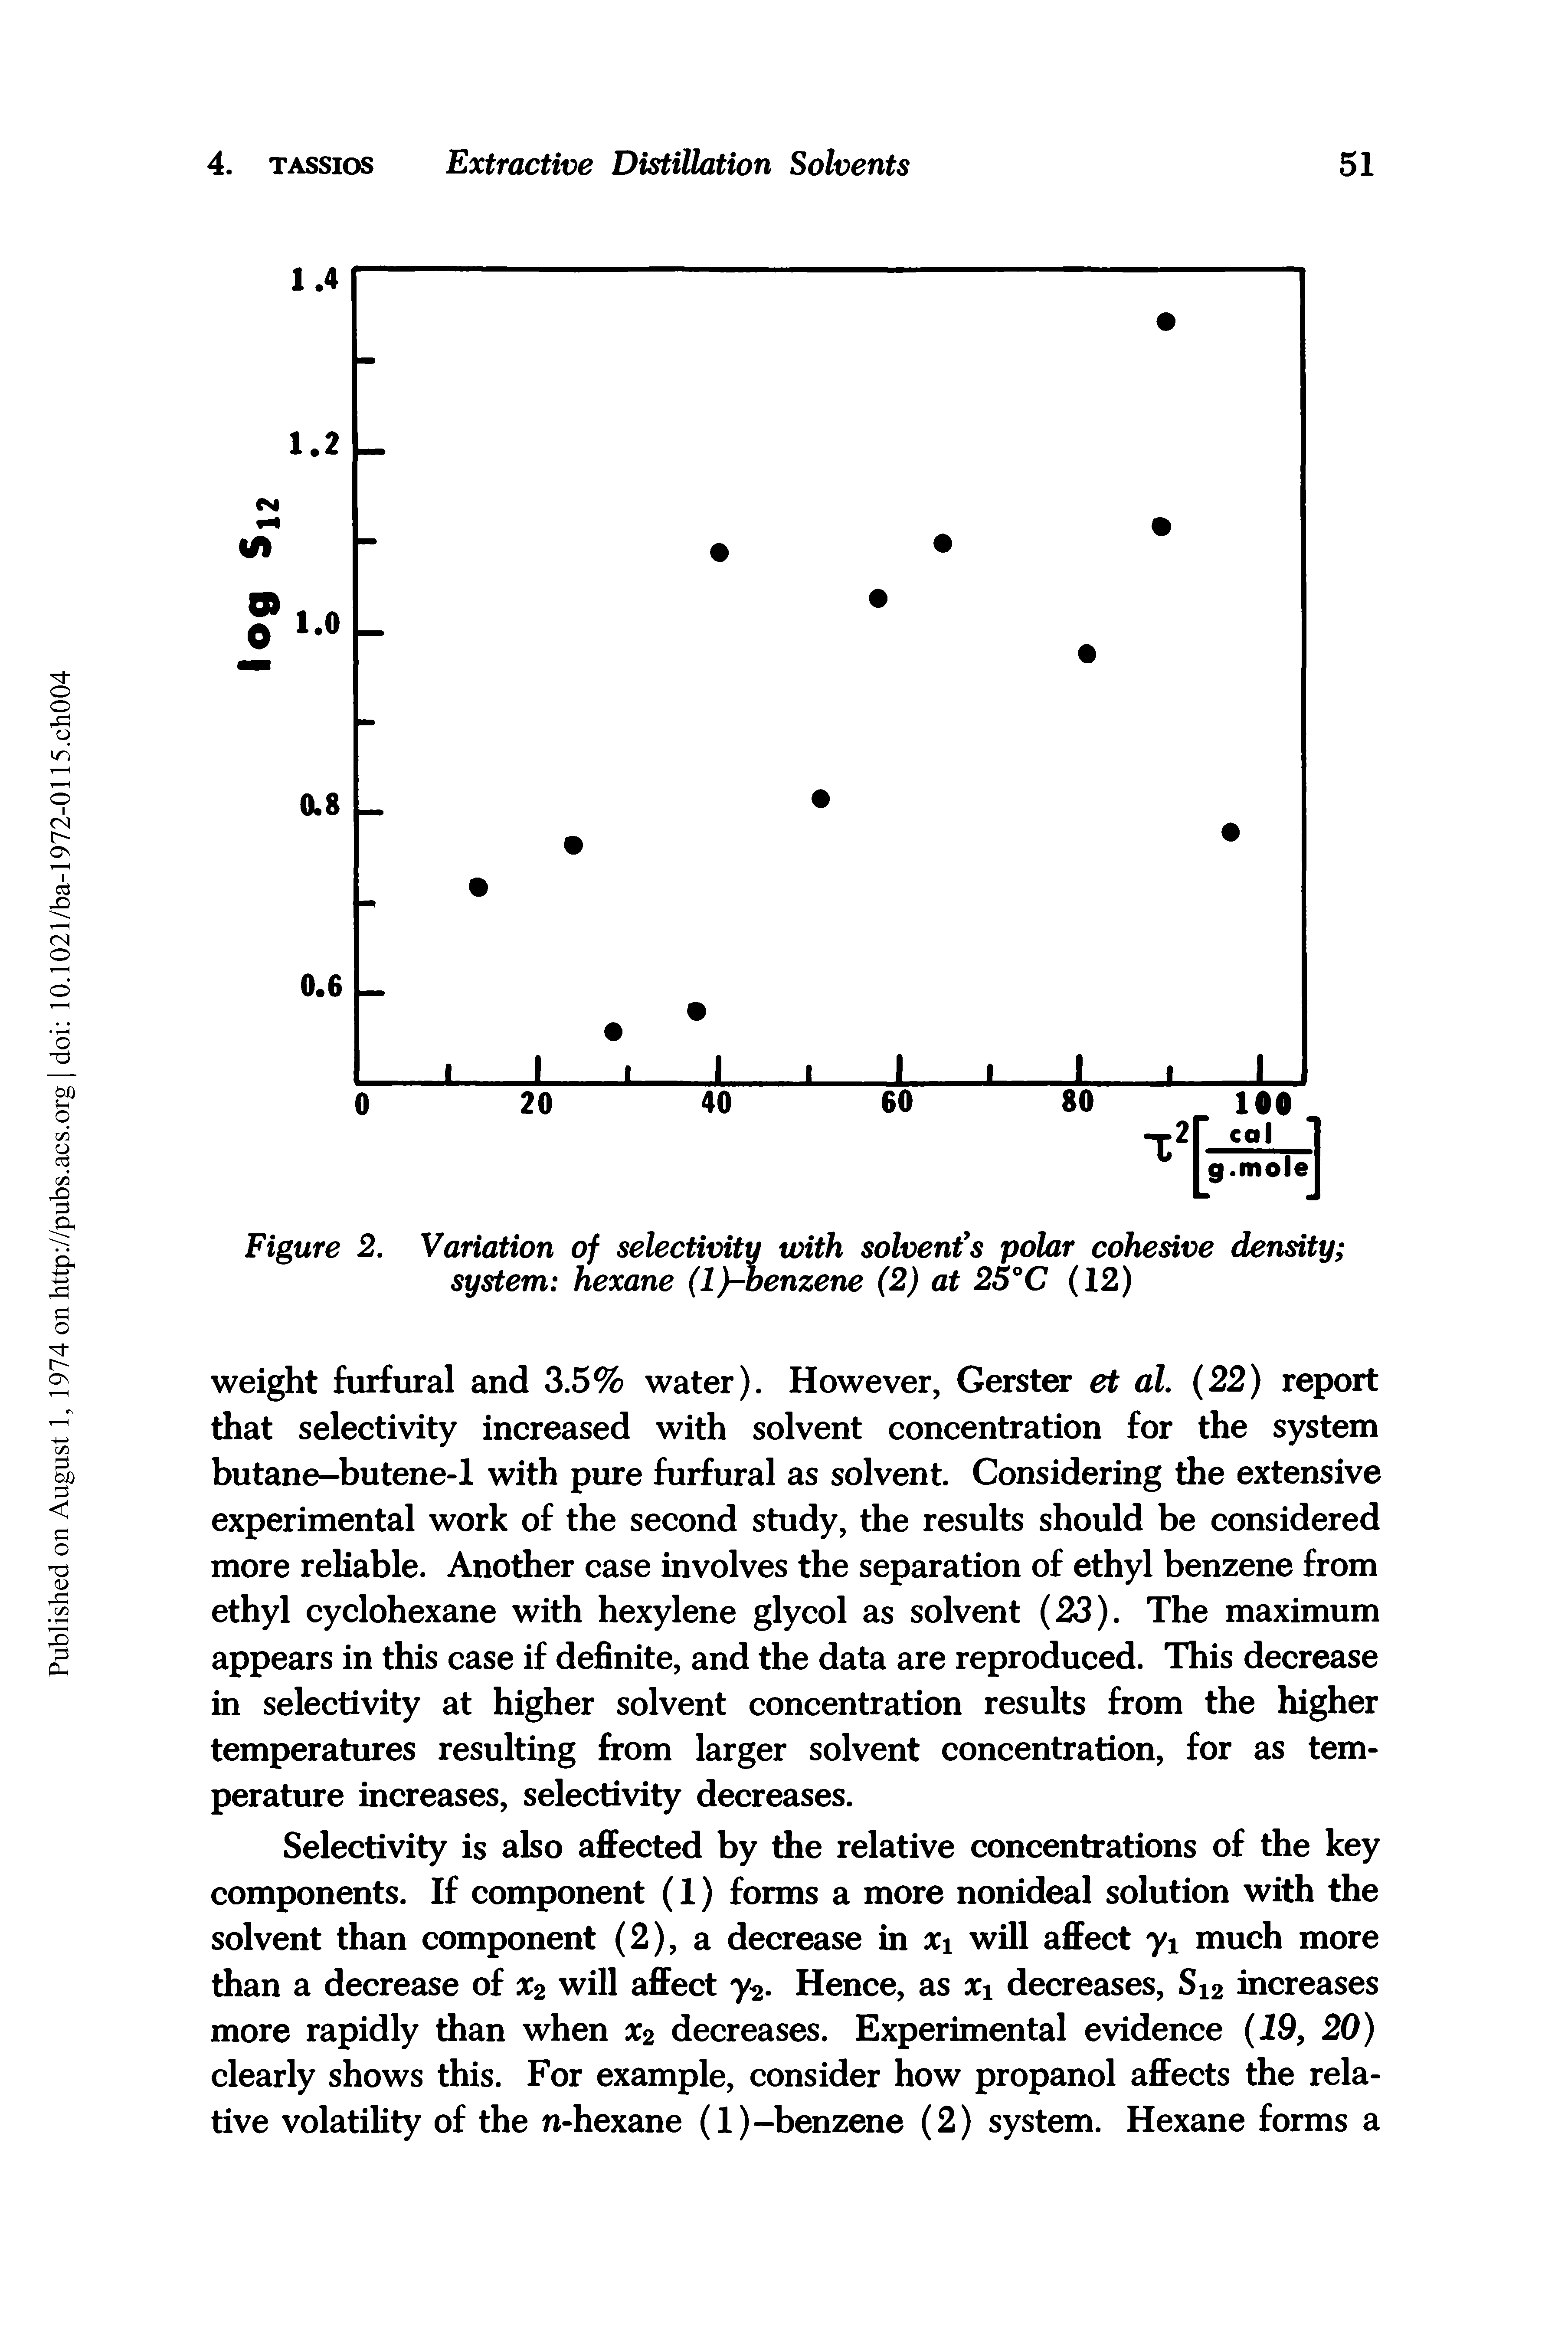 Figure 2. Variation of selectivity with solvent s polar cohesive density system hexane (l -benzene (2) at 25°C (12)...